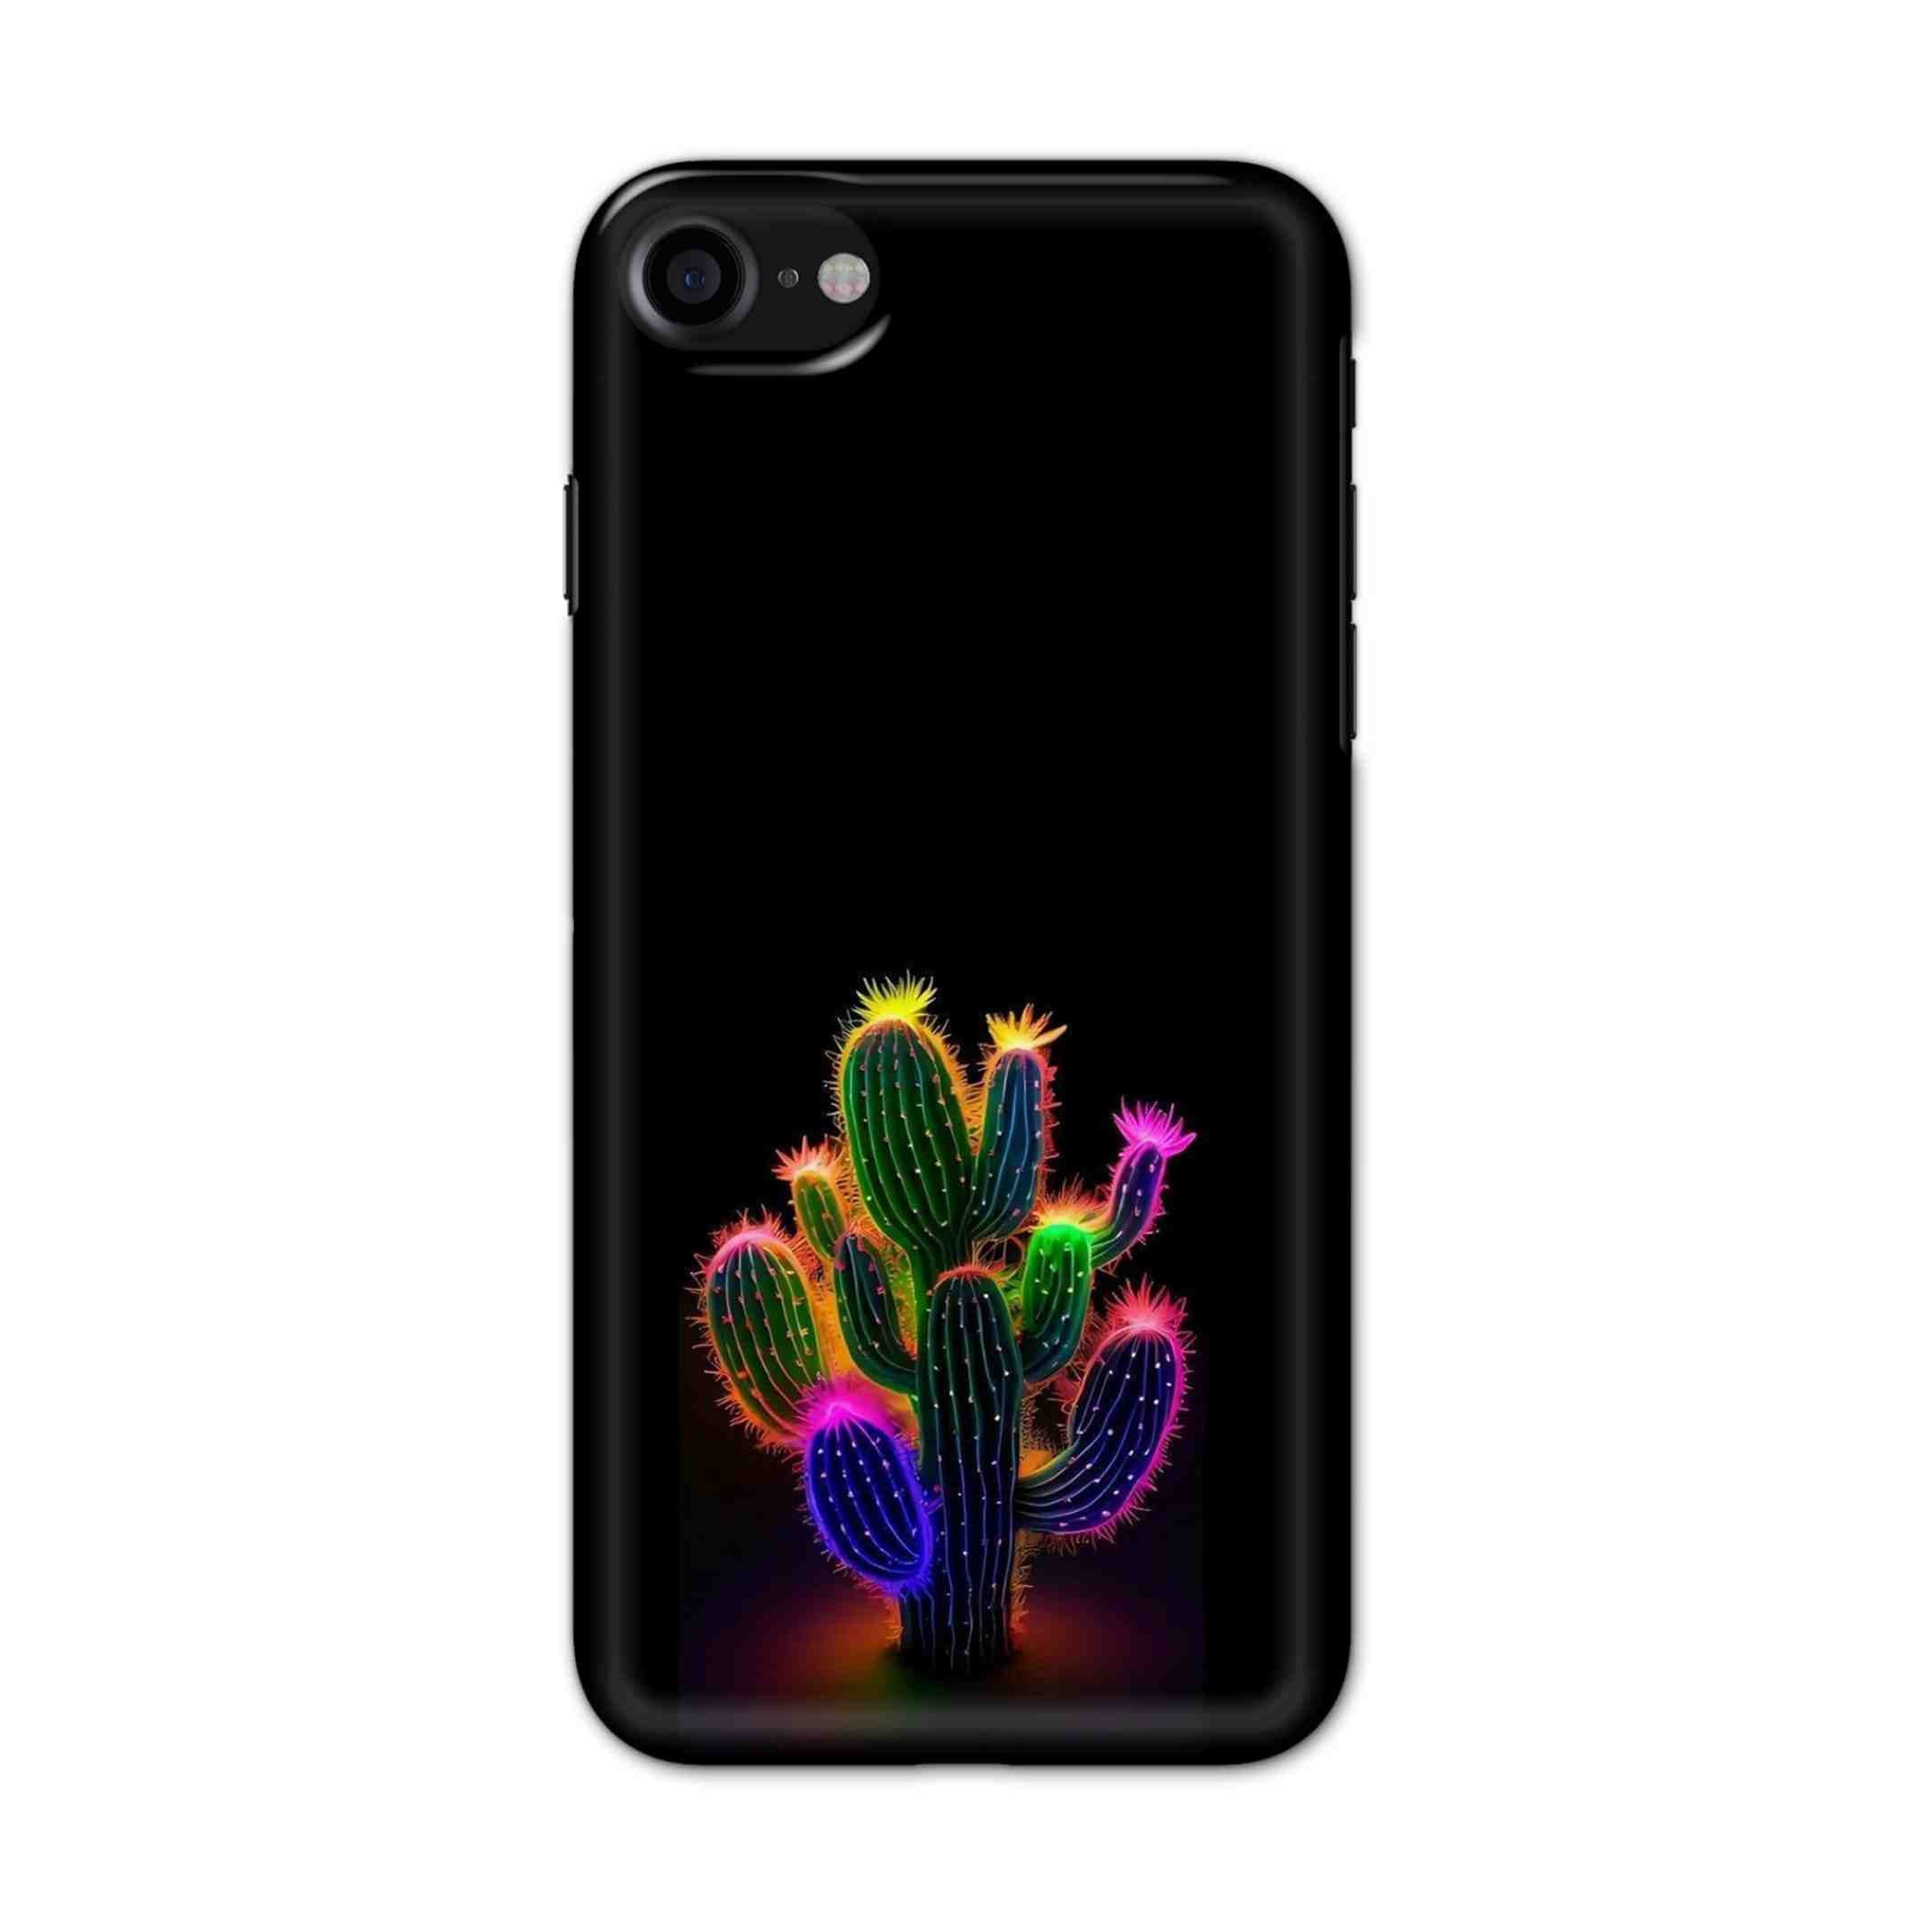 Buy Neon Flower Hard Back Mobile Phone Case/Cover For iPhone 7 / 8 Online